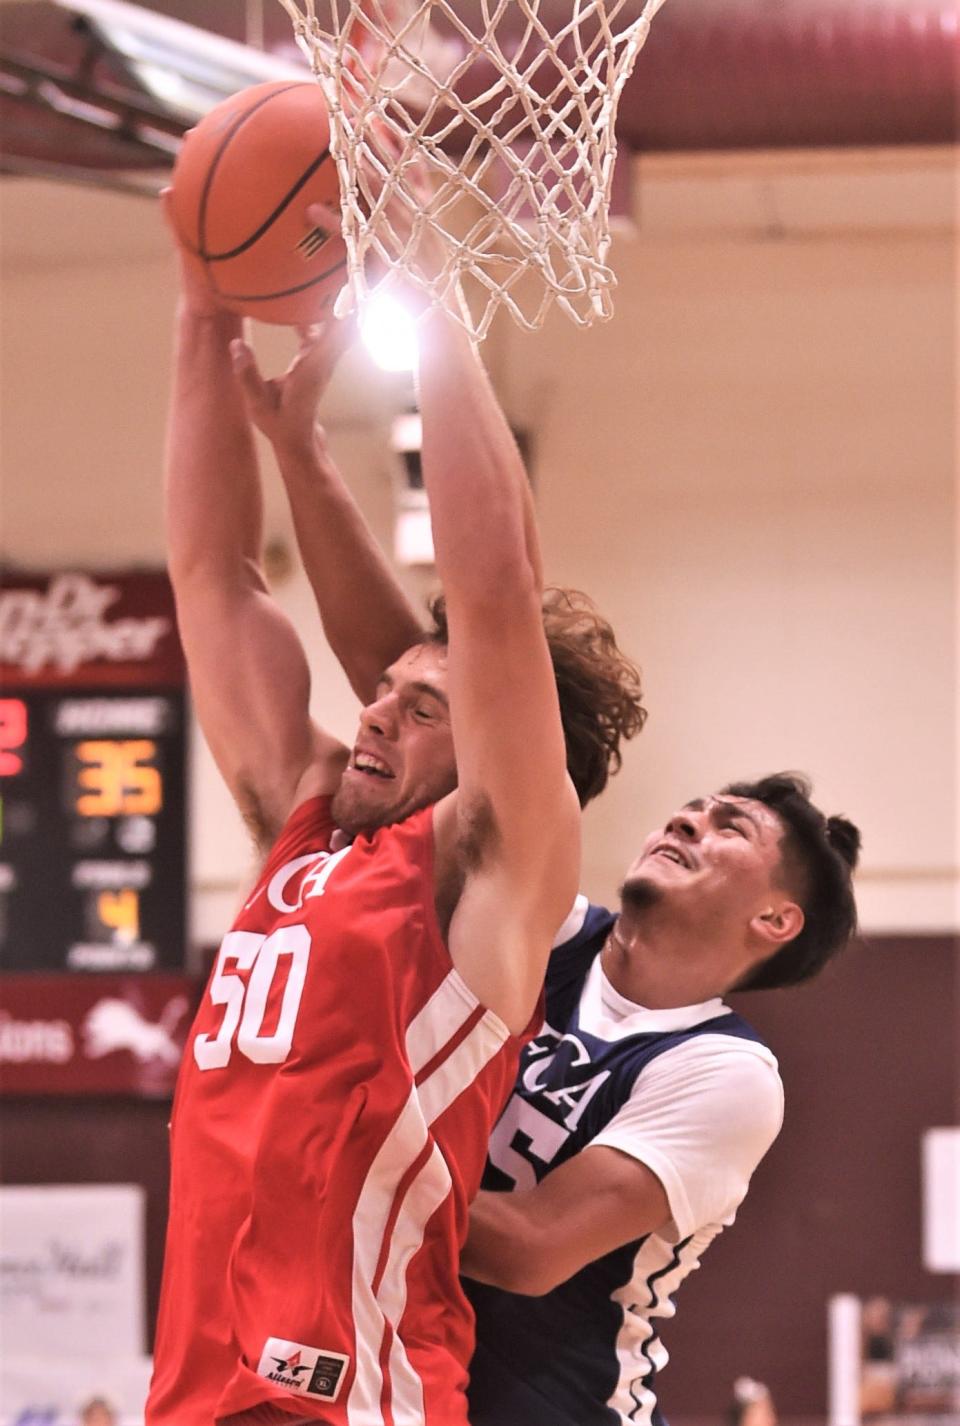 Wylie's Avery Brekke of the South team, left, grabs a rebound over Snyder's Eber Murillo of the North. The South beat the North 89-73 in the Big Country FCA's All-Star Men's Basketball Game on Saturday, June 4, at Brownwood High School.